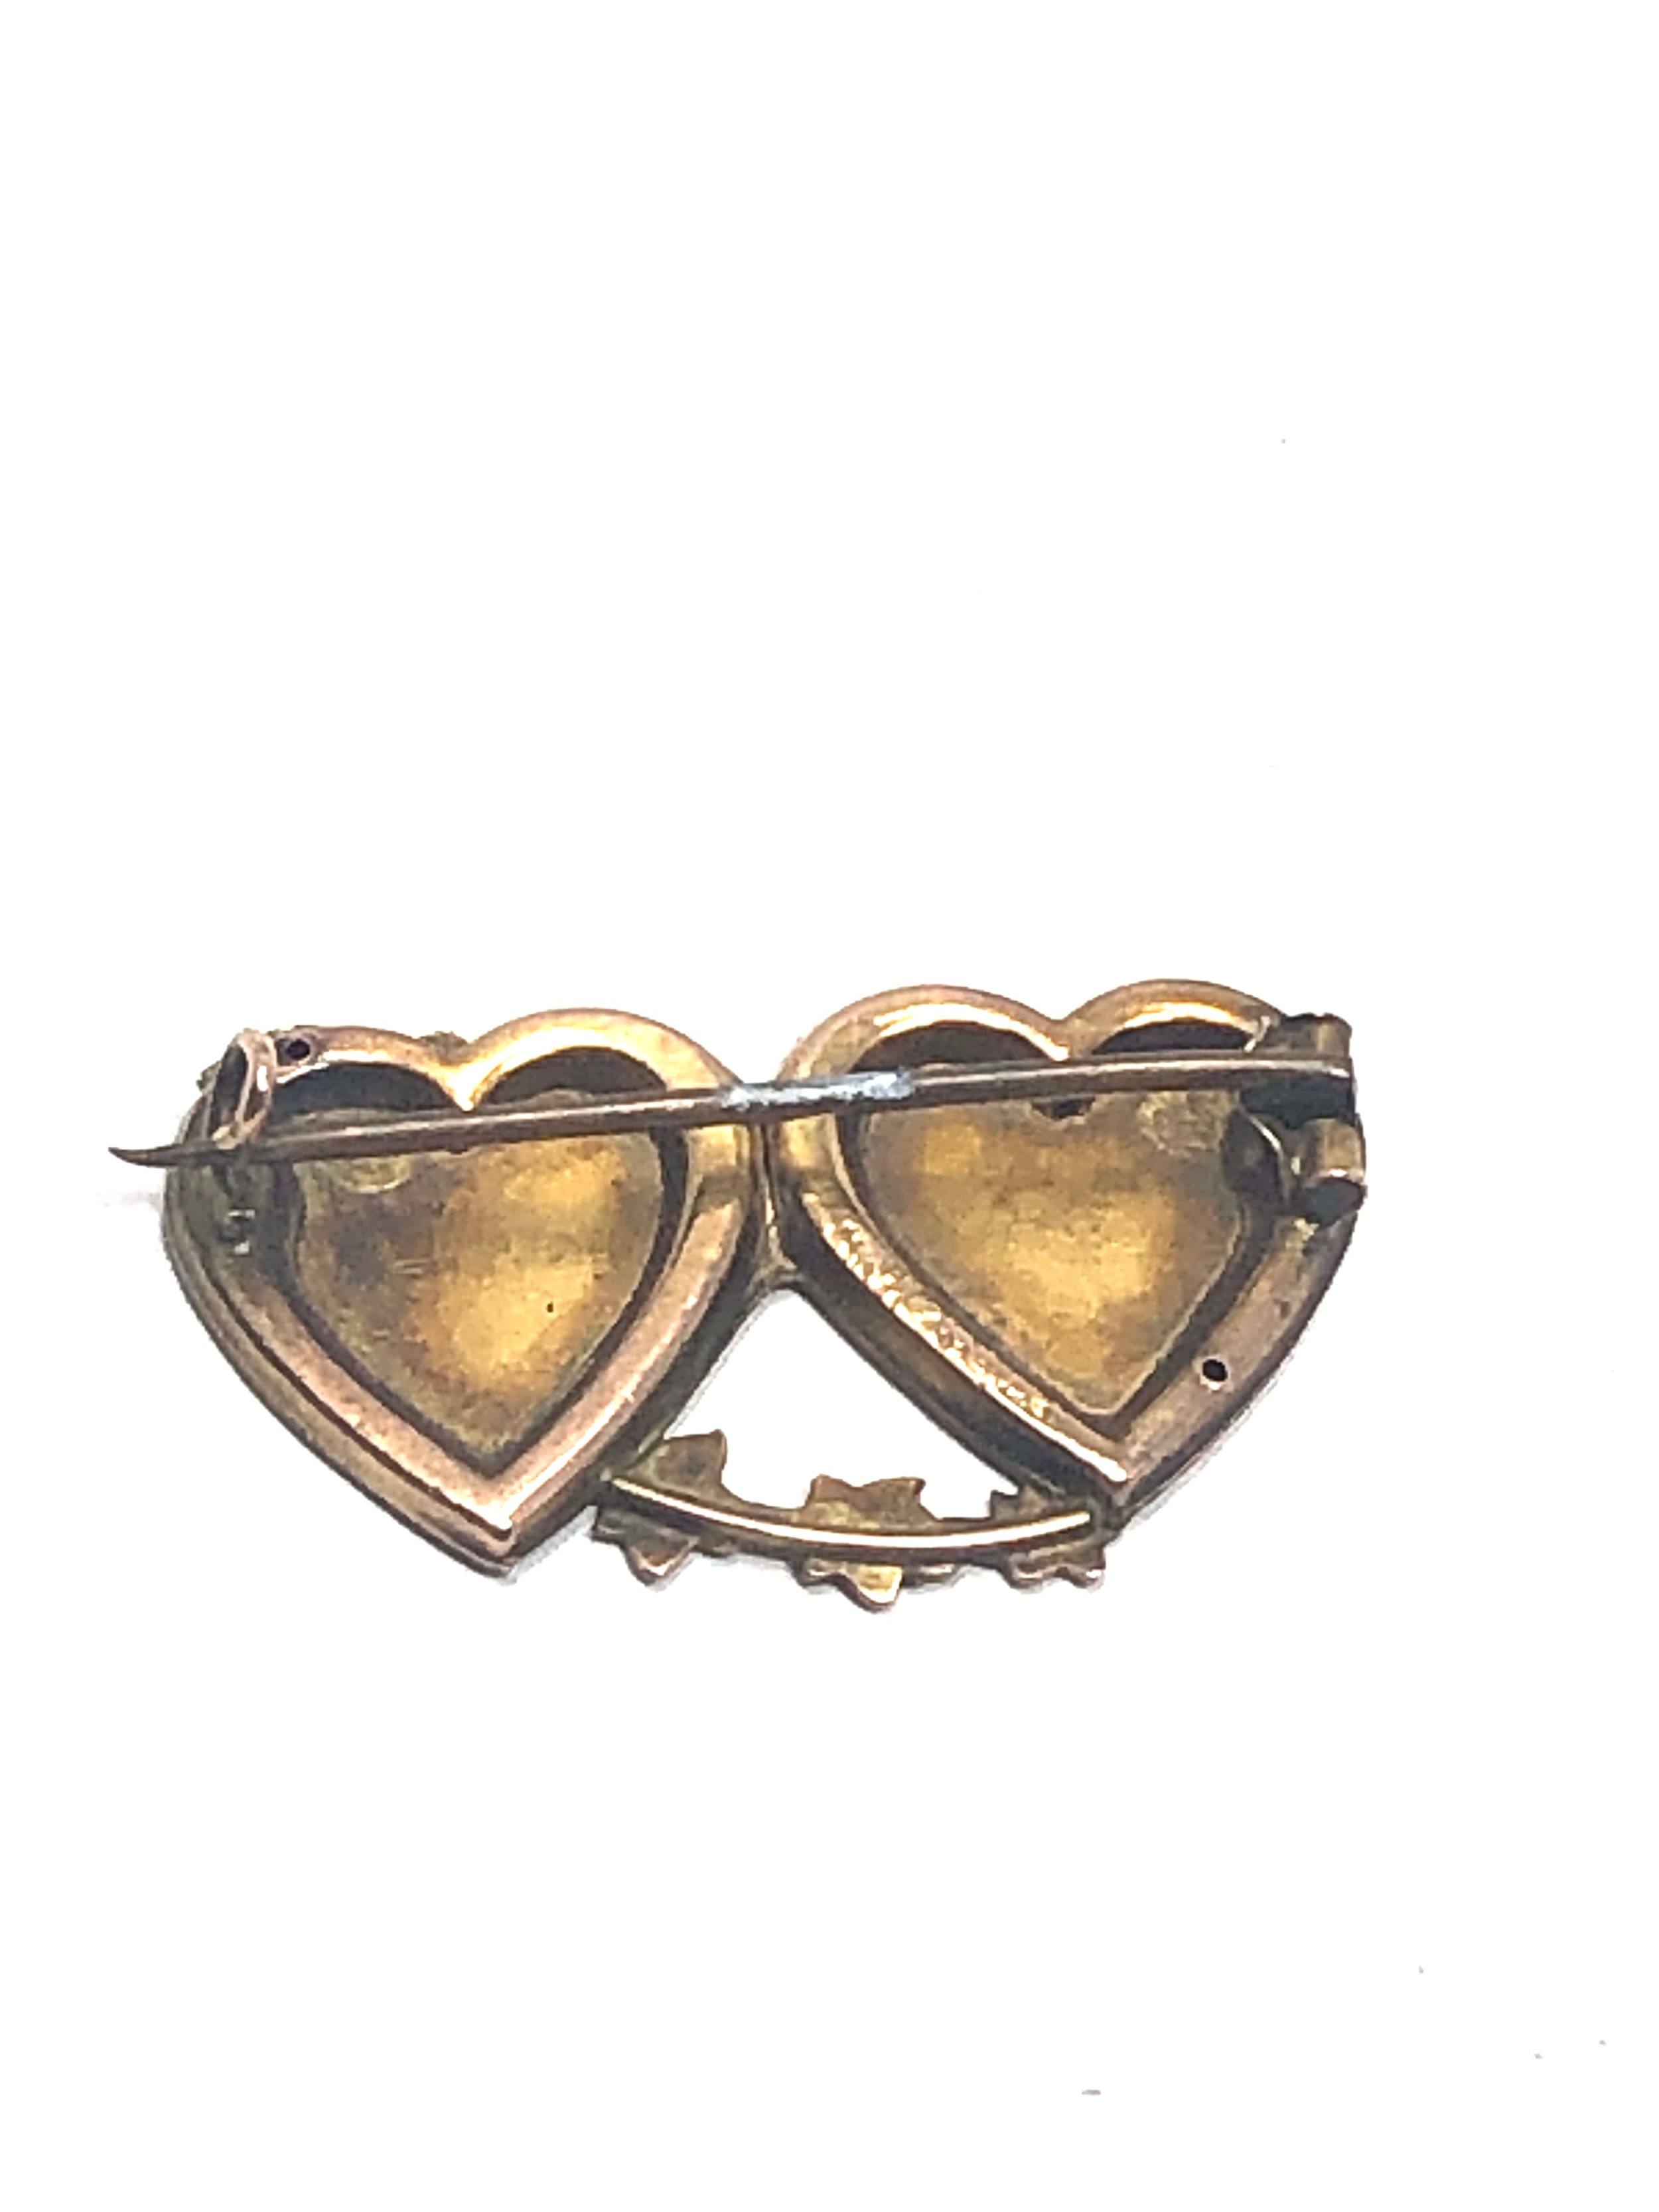 Antique 9ct gold joined hearts mizpah brooch measures approx 2.9cm wide - Image 3 of 3